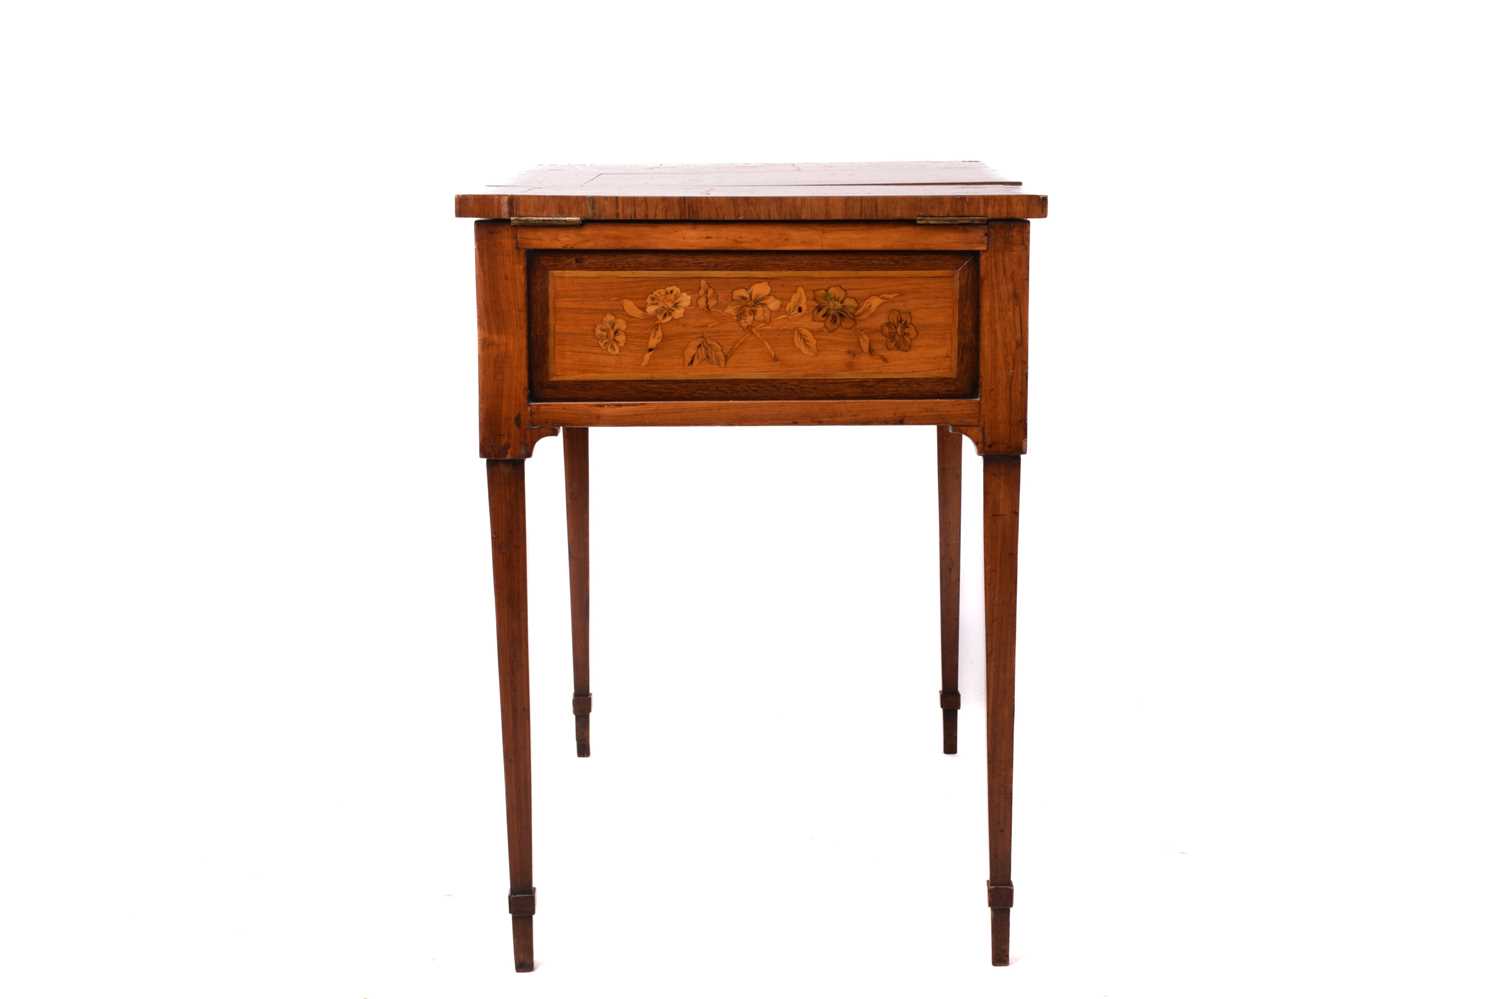 A French marquetry inlaid kingwood poudreuse dressing table decorated with flowers and musical - Image 5 of 9